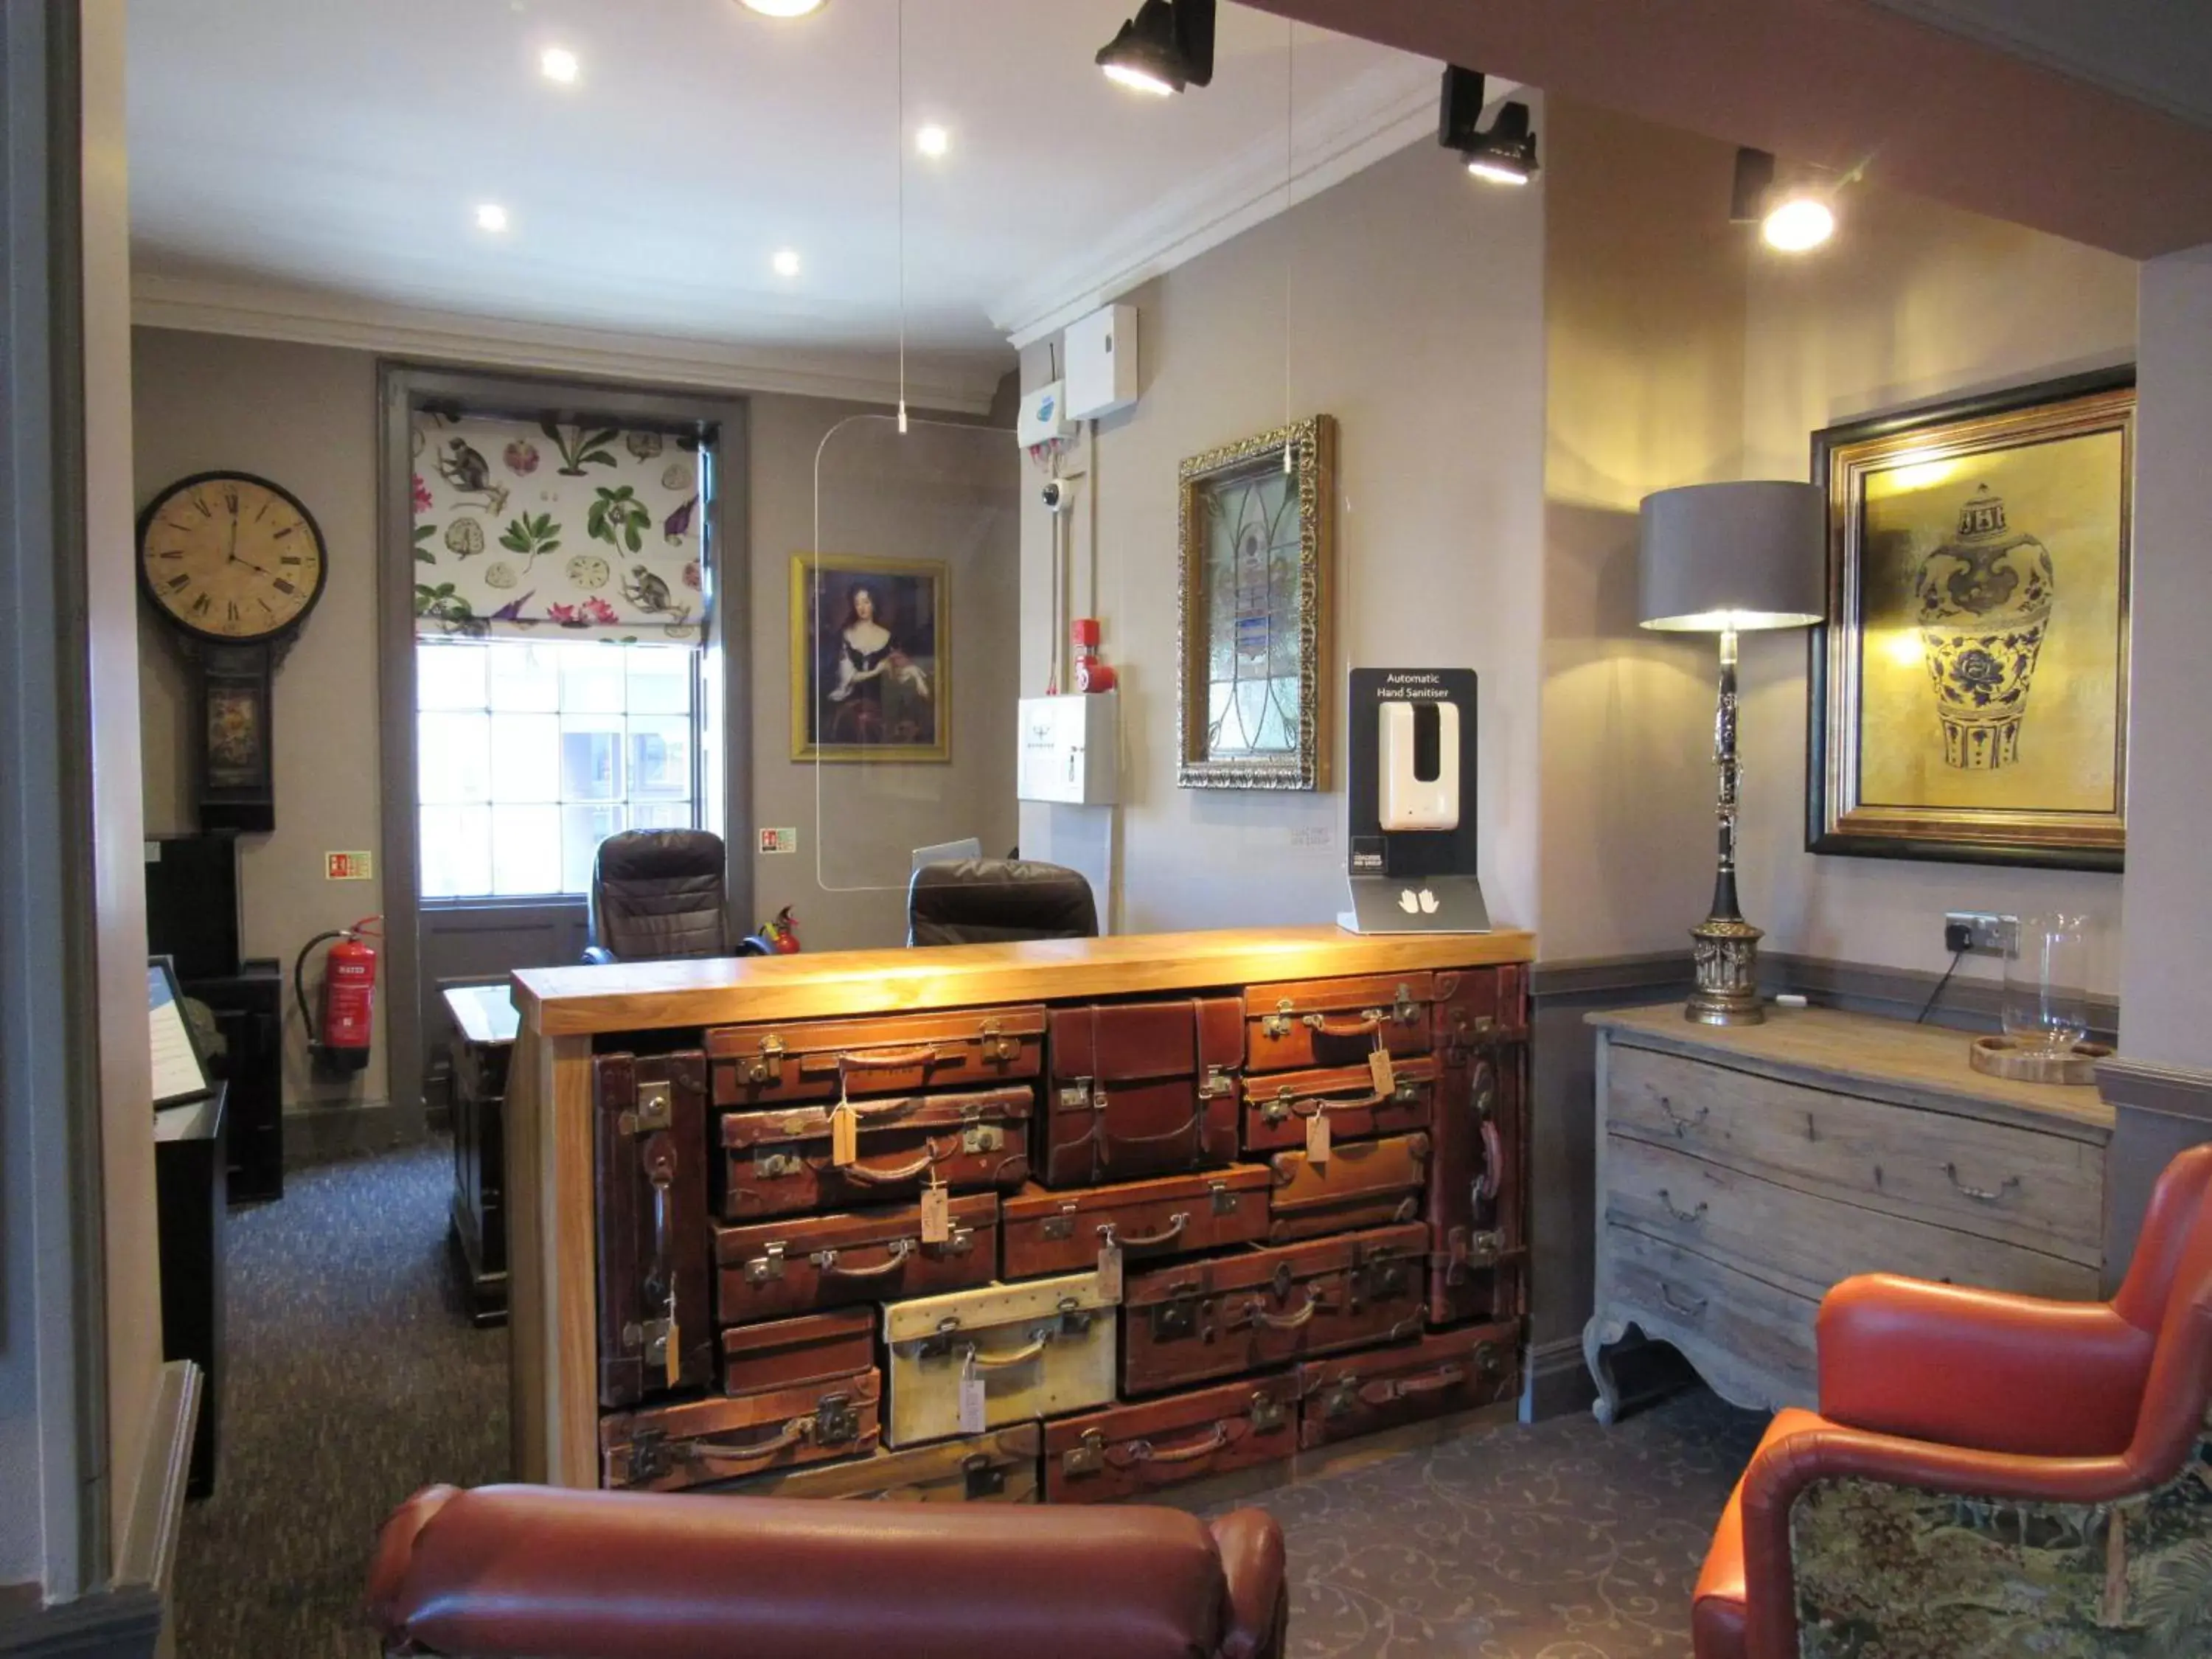 Lobby or reception in The Rutland Arms Hotel, Bakewell, Derbyshire